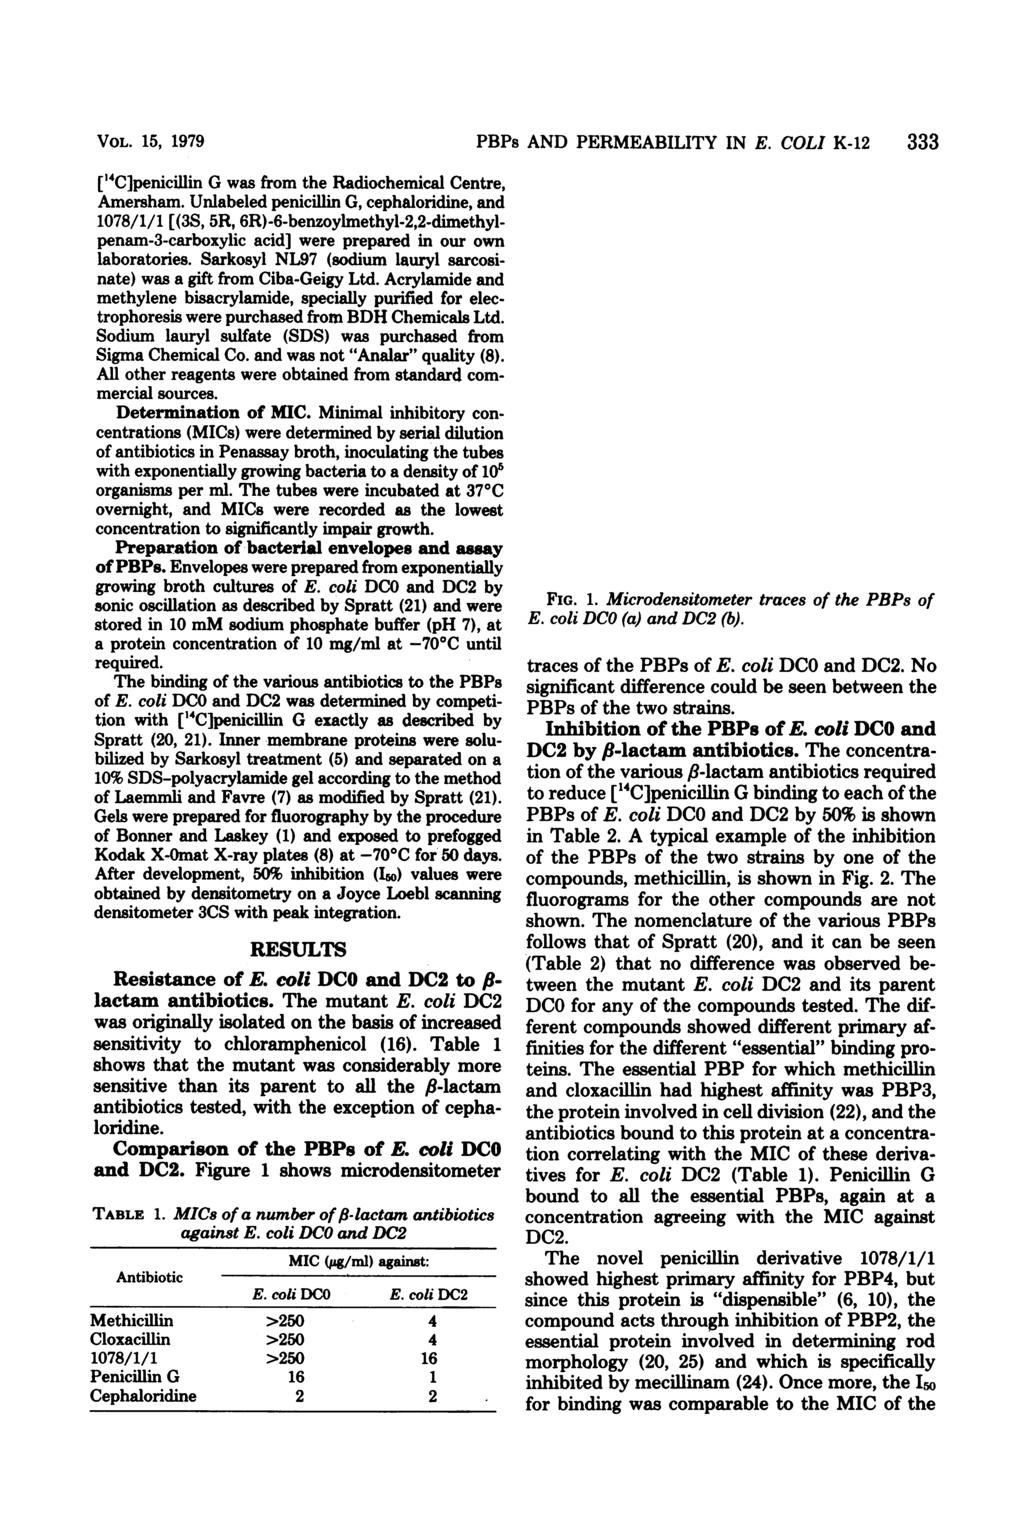 VOL. 15, 1979 ["4C]penicillin G was from the Radiochemical Centre, Amersham.